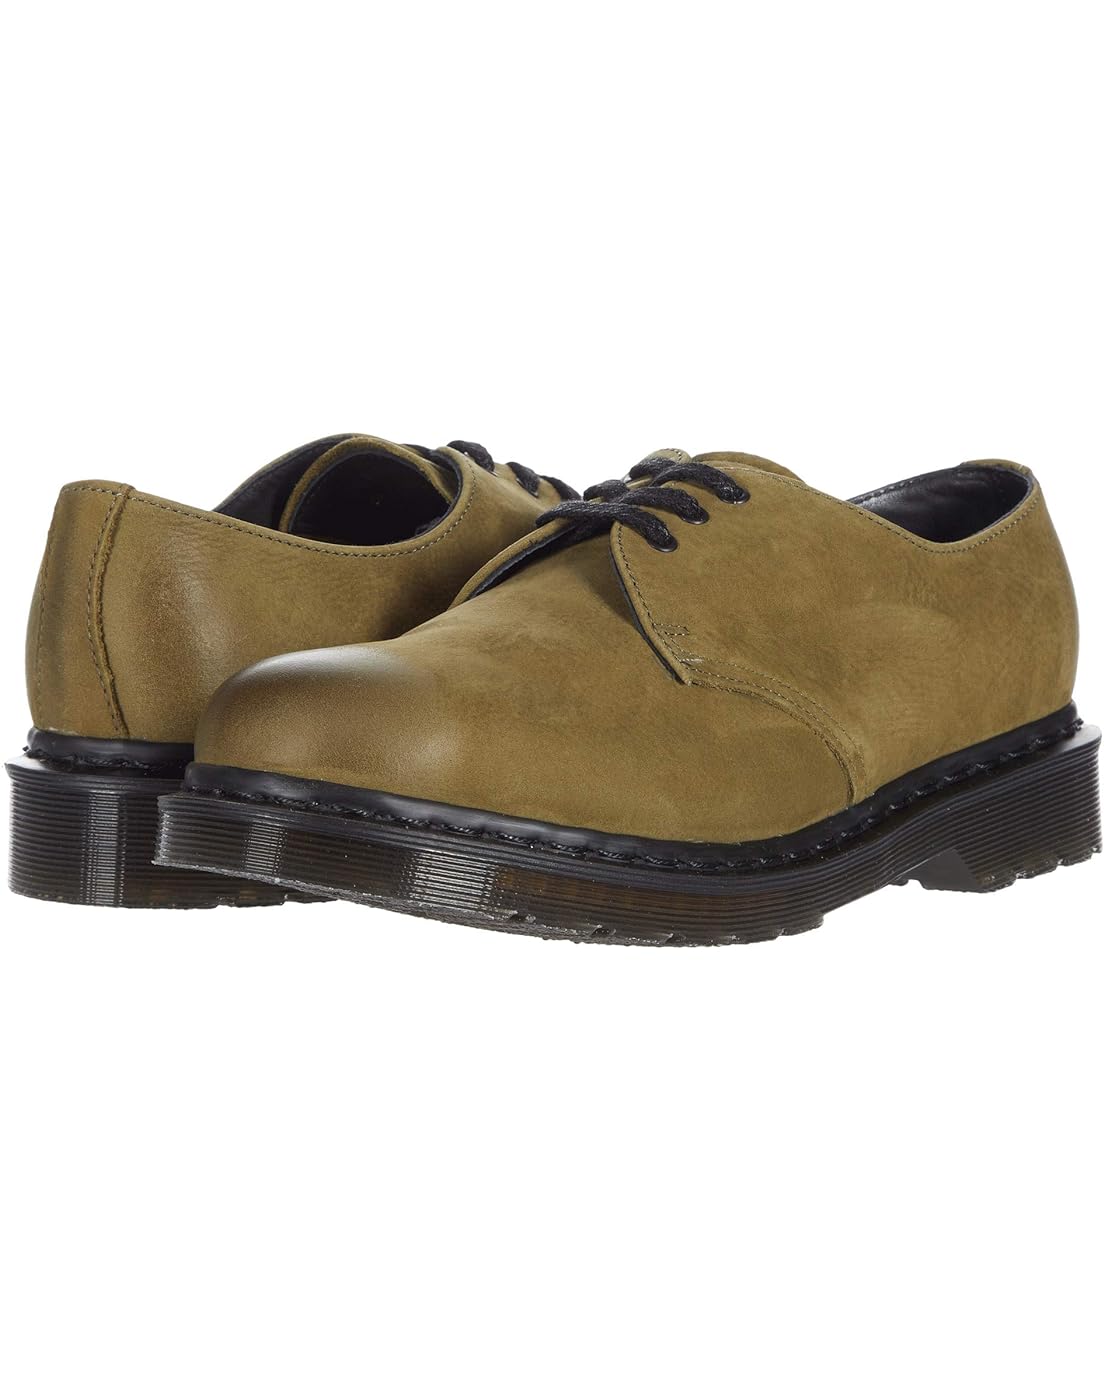 Dr. Martens 1461 Made In England